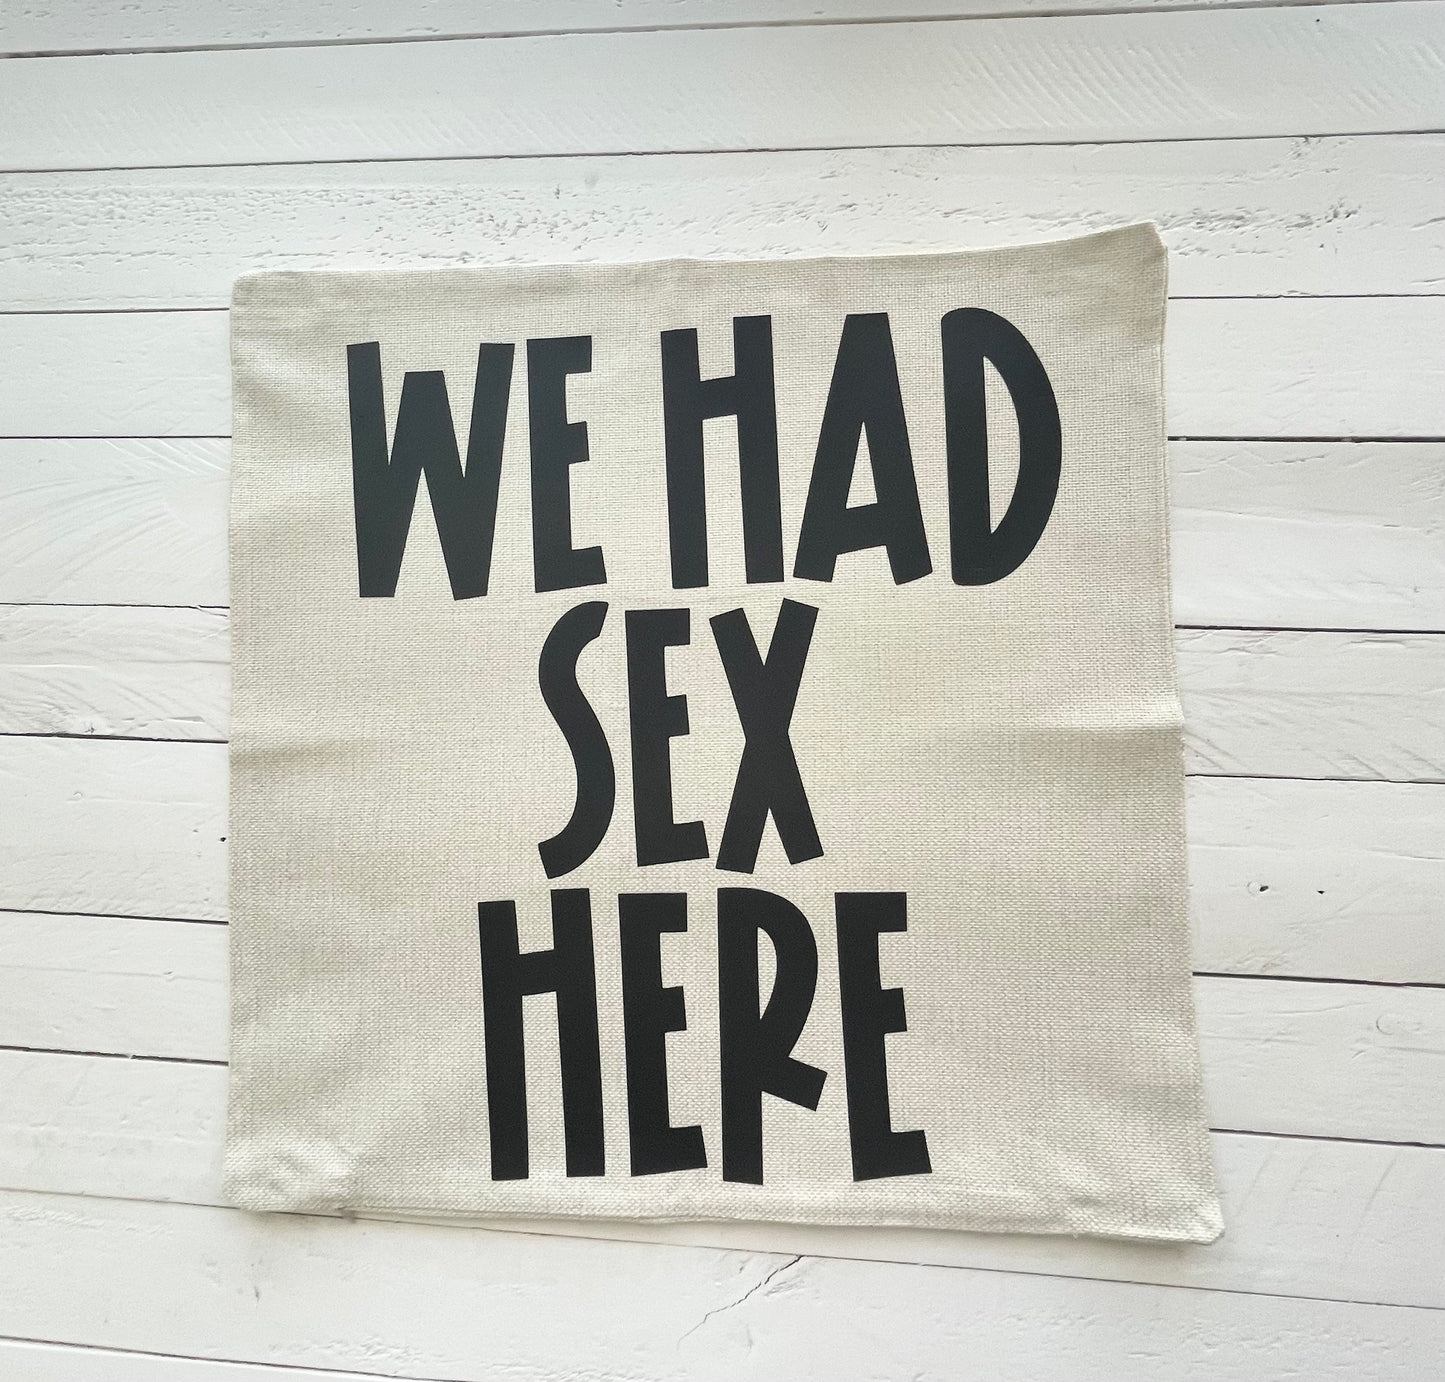 We had sex here, and here, 17x17 Pillowcase Set of 2, With or Without Pillows